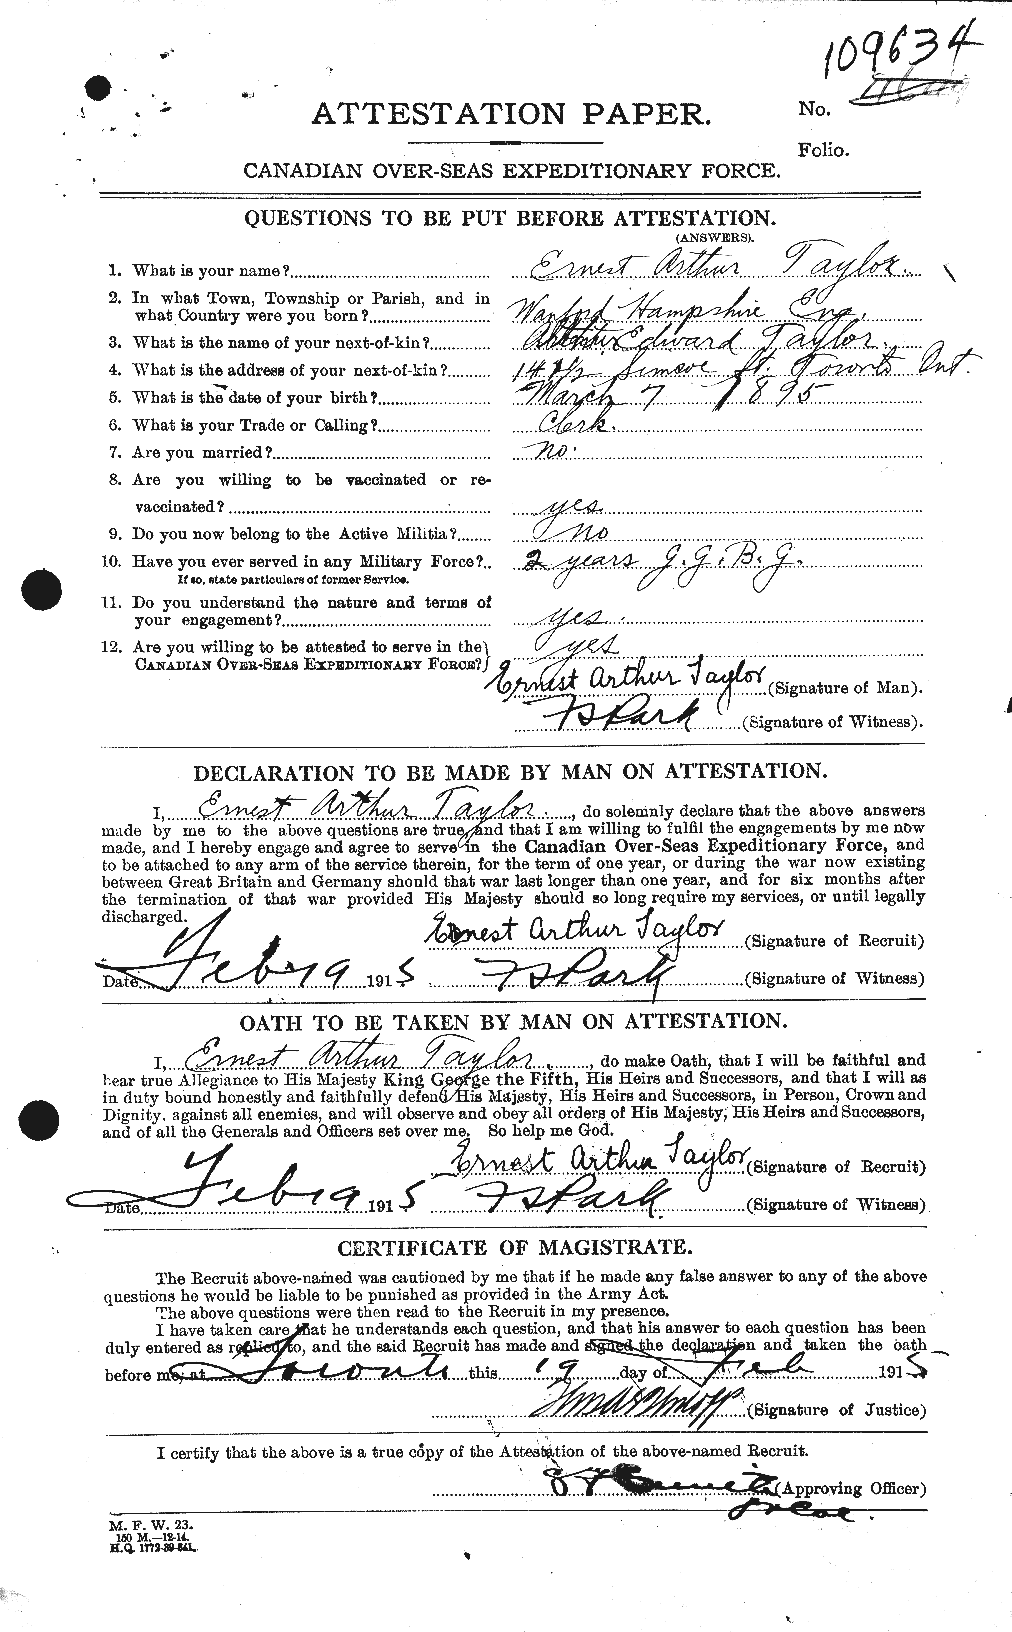 Personnel Records of the First World War - CEF 627388a